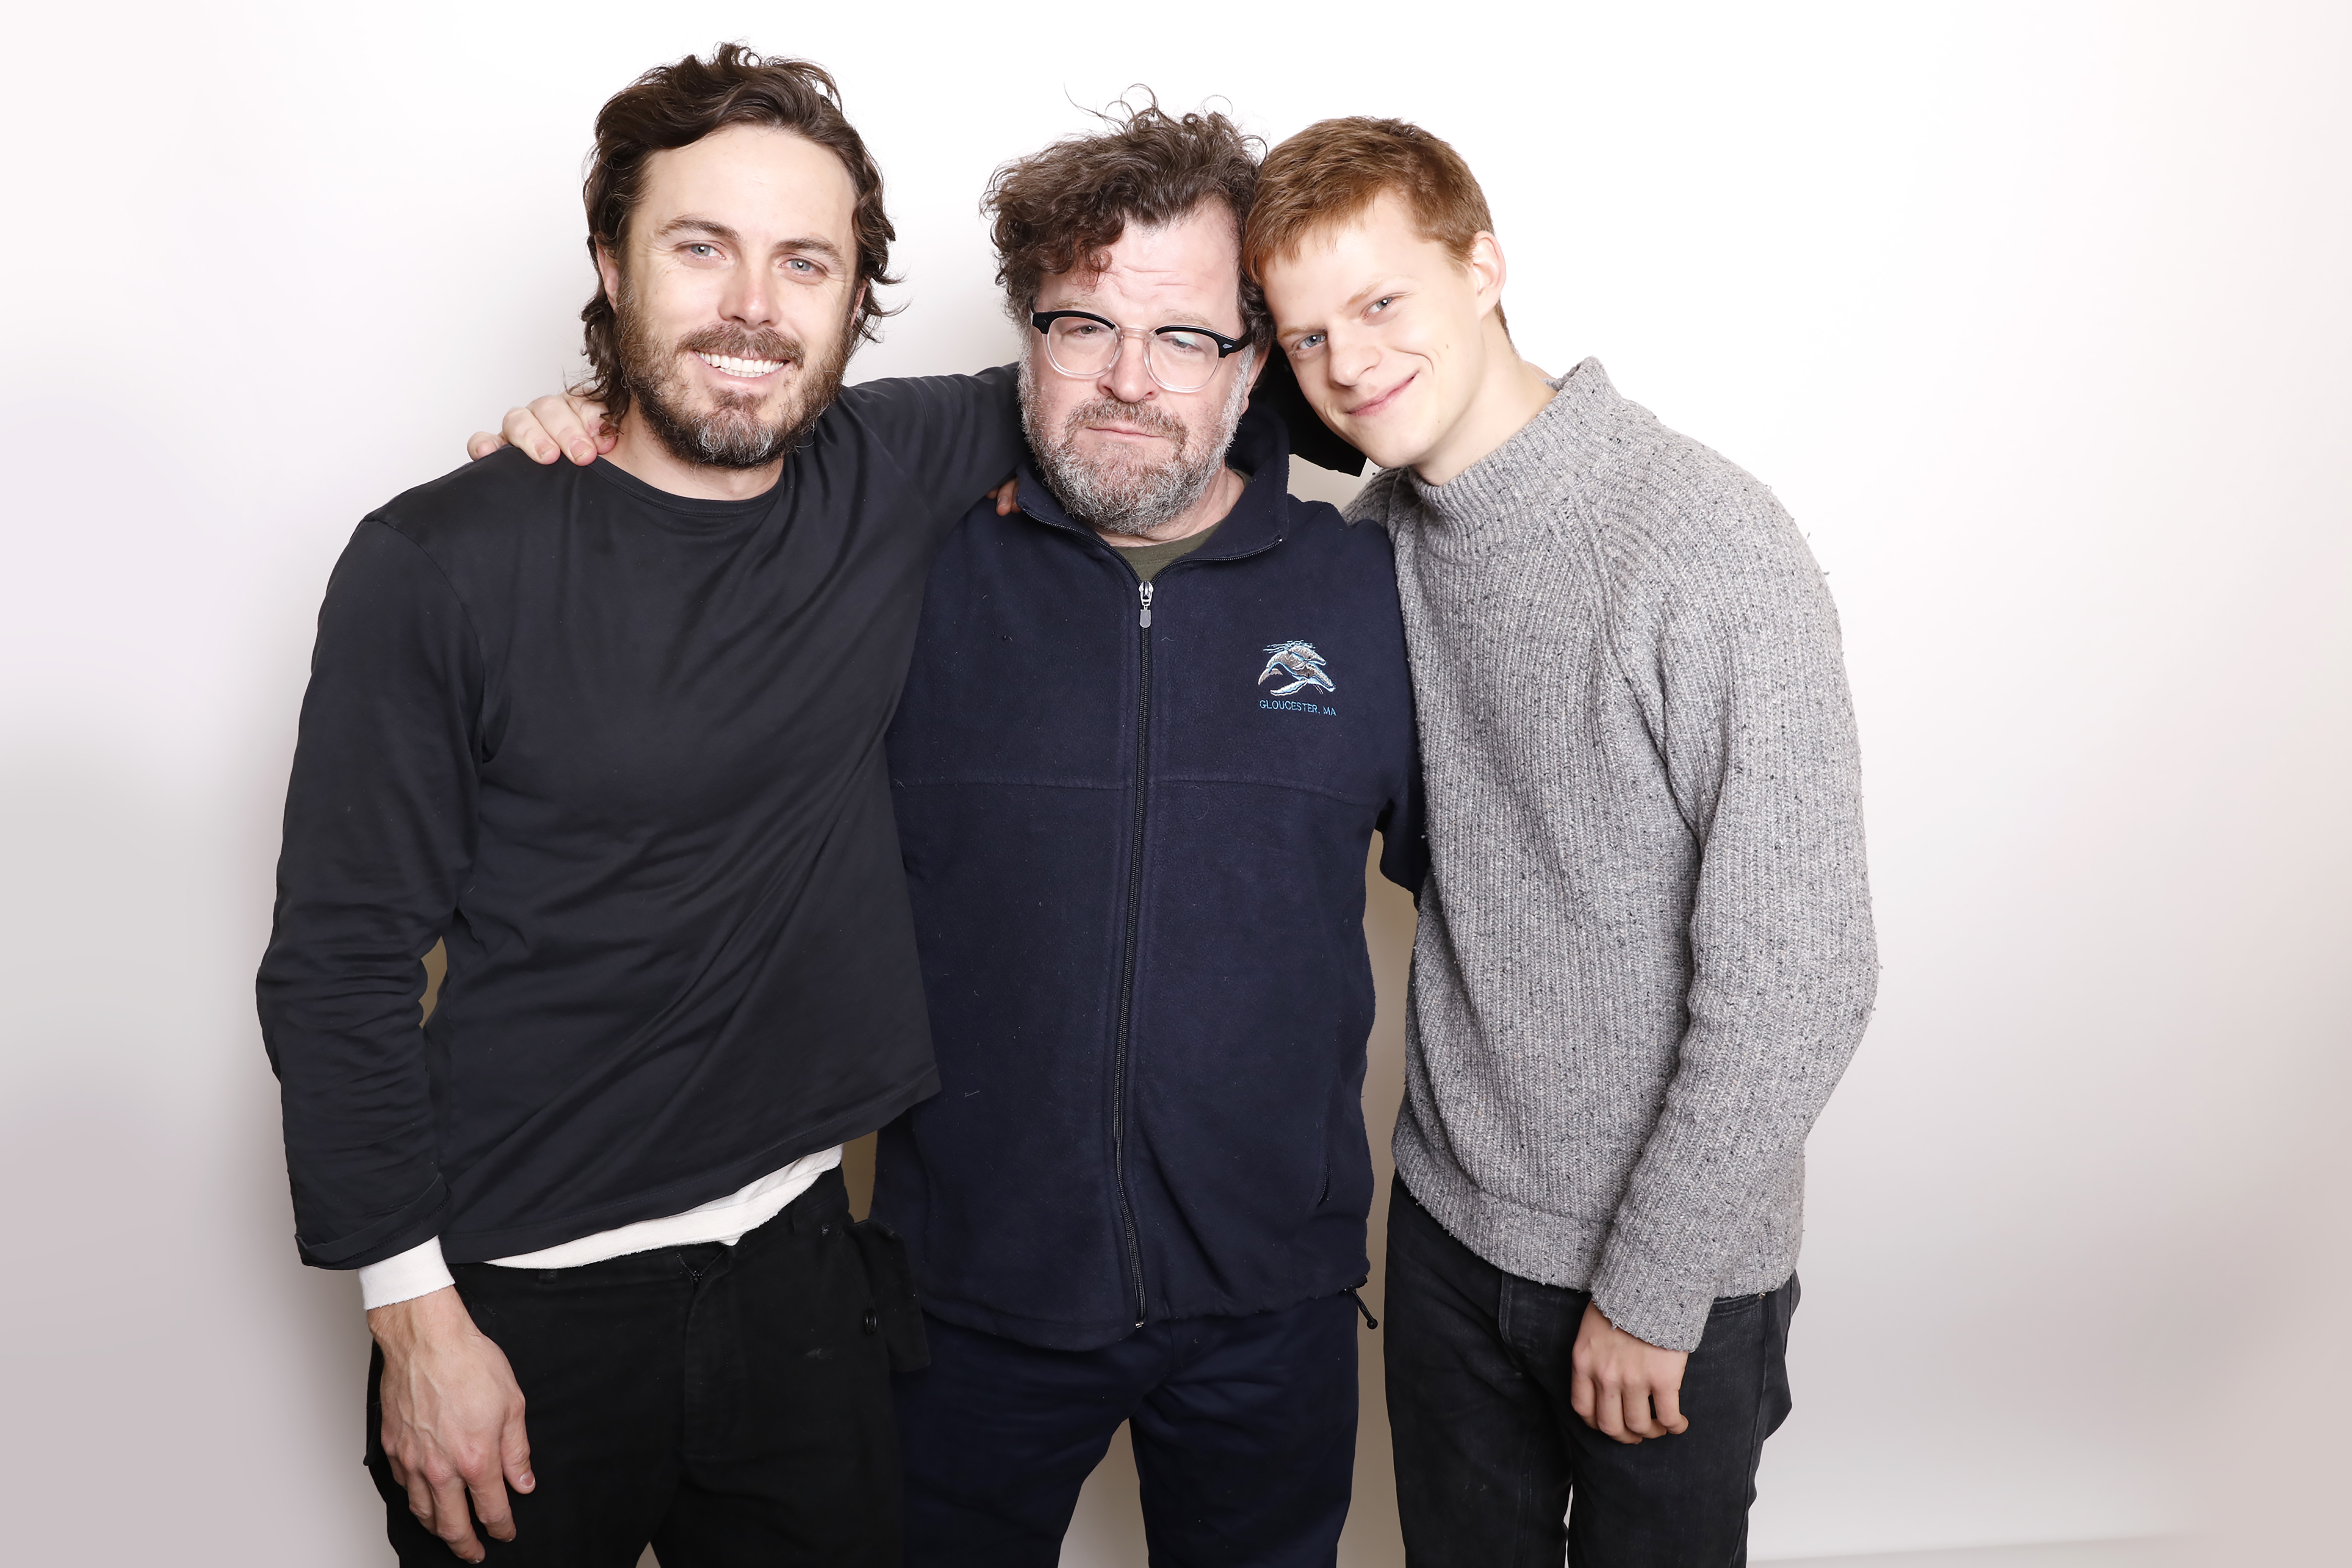 Director Kenneth Lonergan poses with actors Casey Affleck,  left, and Lucas Hedges for a portrait to promote the film "Manchester by the Sea" during the Sundance Film Festival on Jan. 24, 2016 in Park City, Utah. (Matt Sayles—Invision/AP)